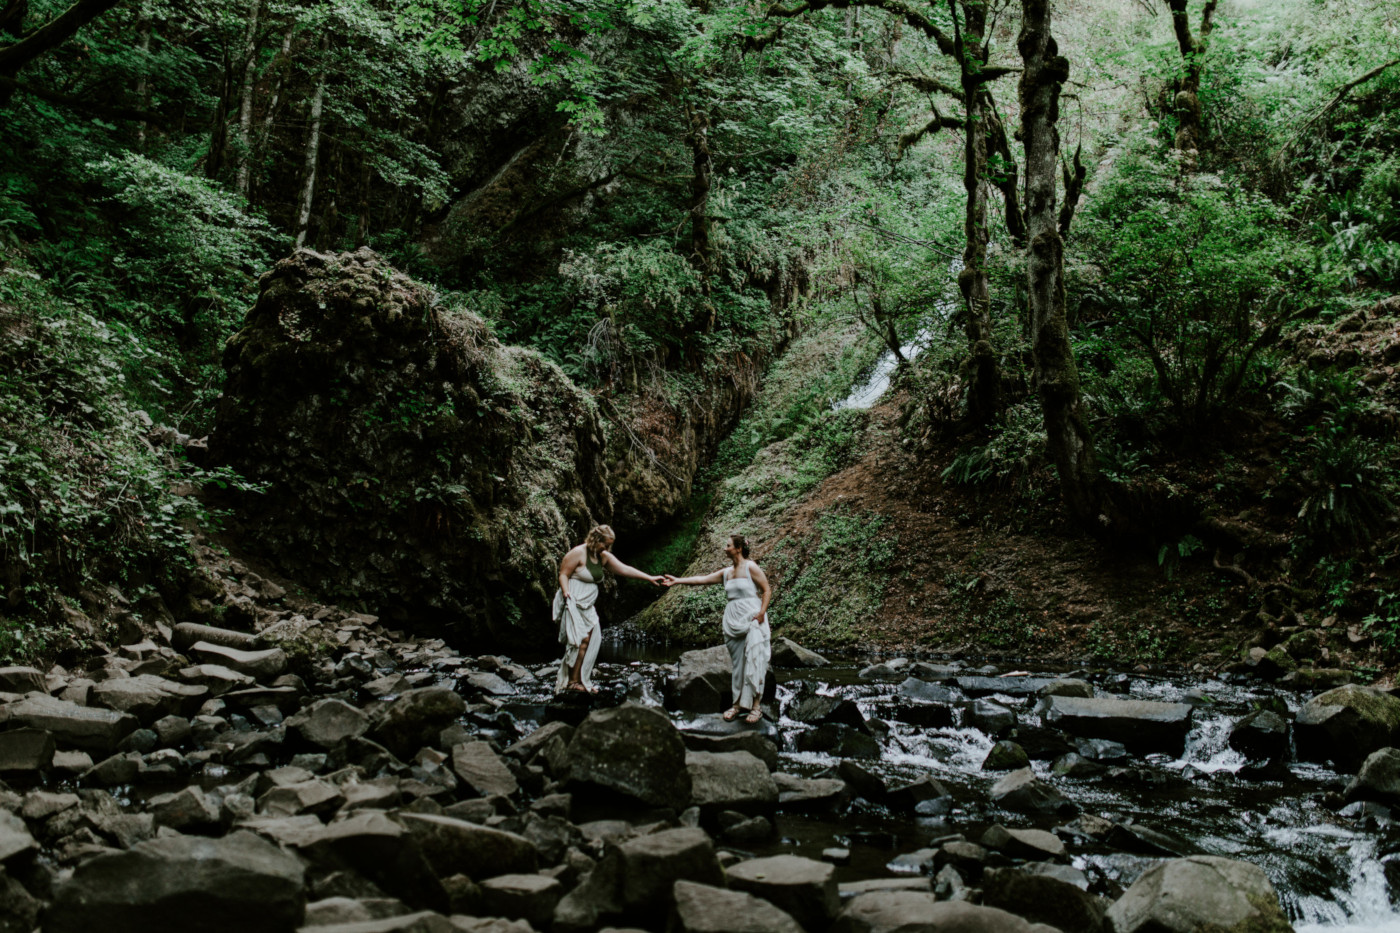 Kate and Audrey make their way across the rocks. Elopement wedding photography at Bridal Veil Falls by Sienna Plus Josh.